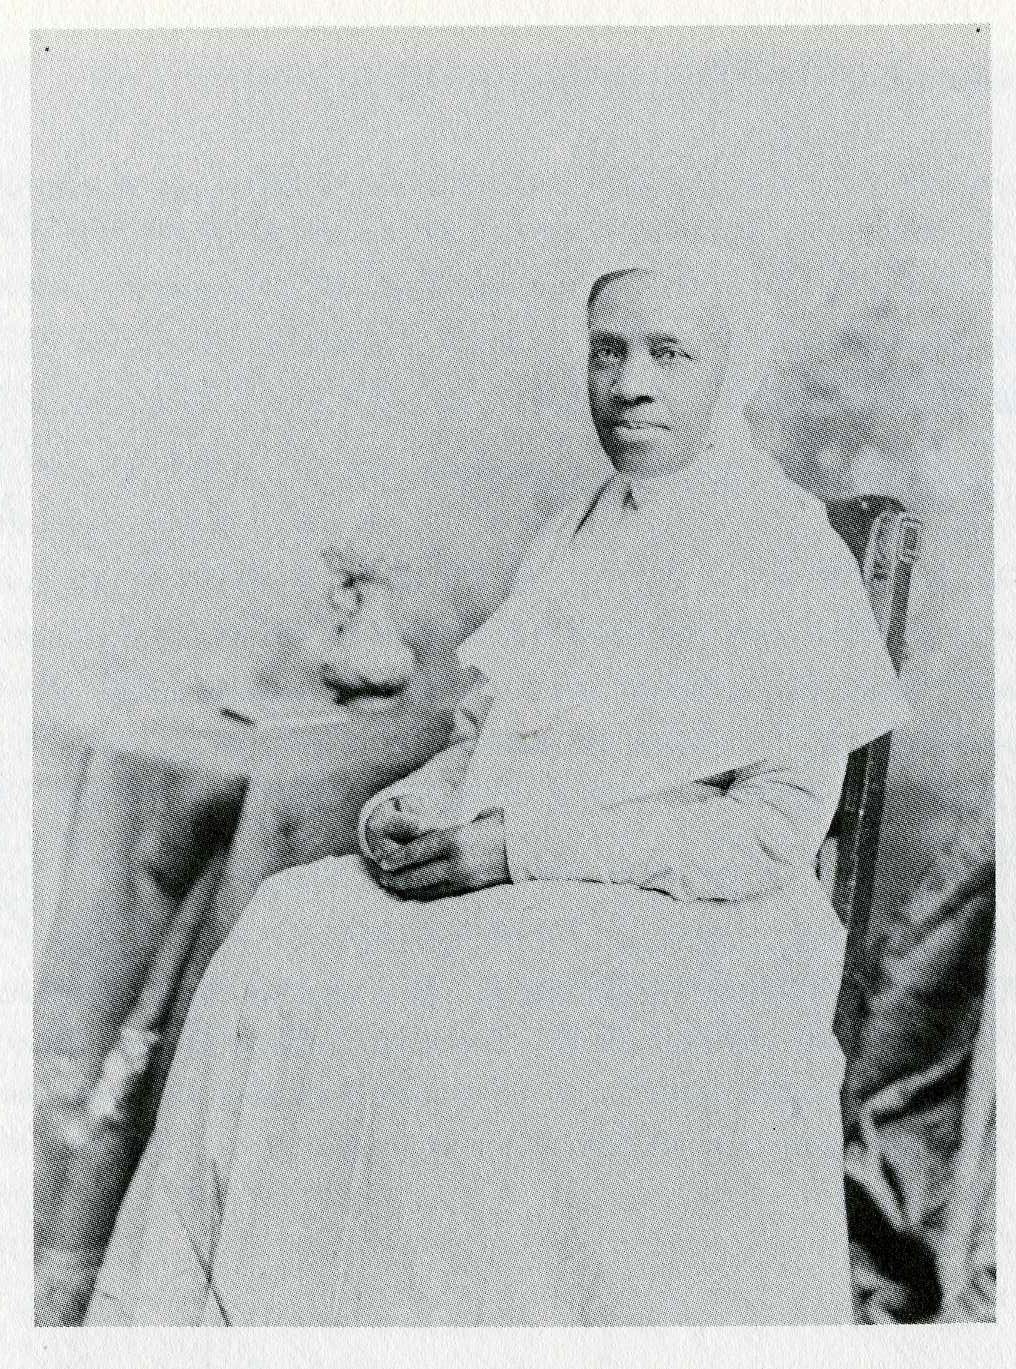 Eldress Rebecca Perot, who ran an African American family node in Philadelphia for over 40 years, Collection of of the United Society of Shakers, Sabbathday Lake, Maine